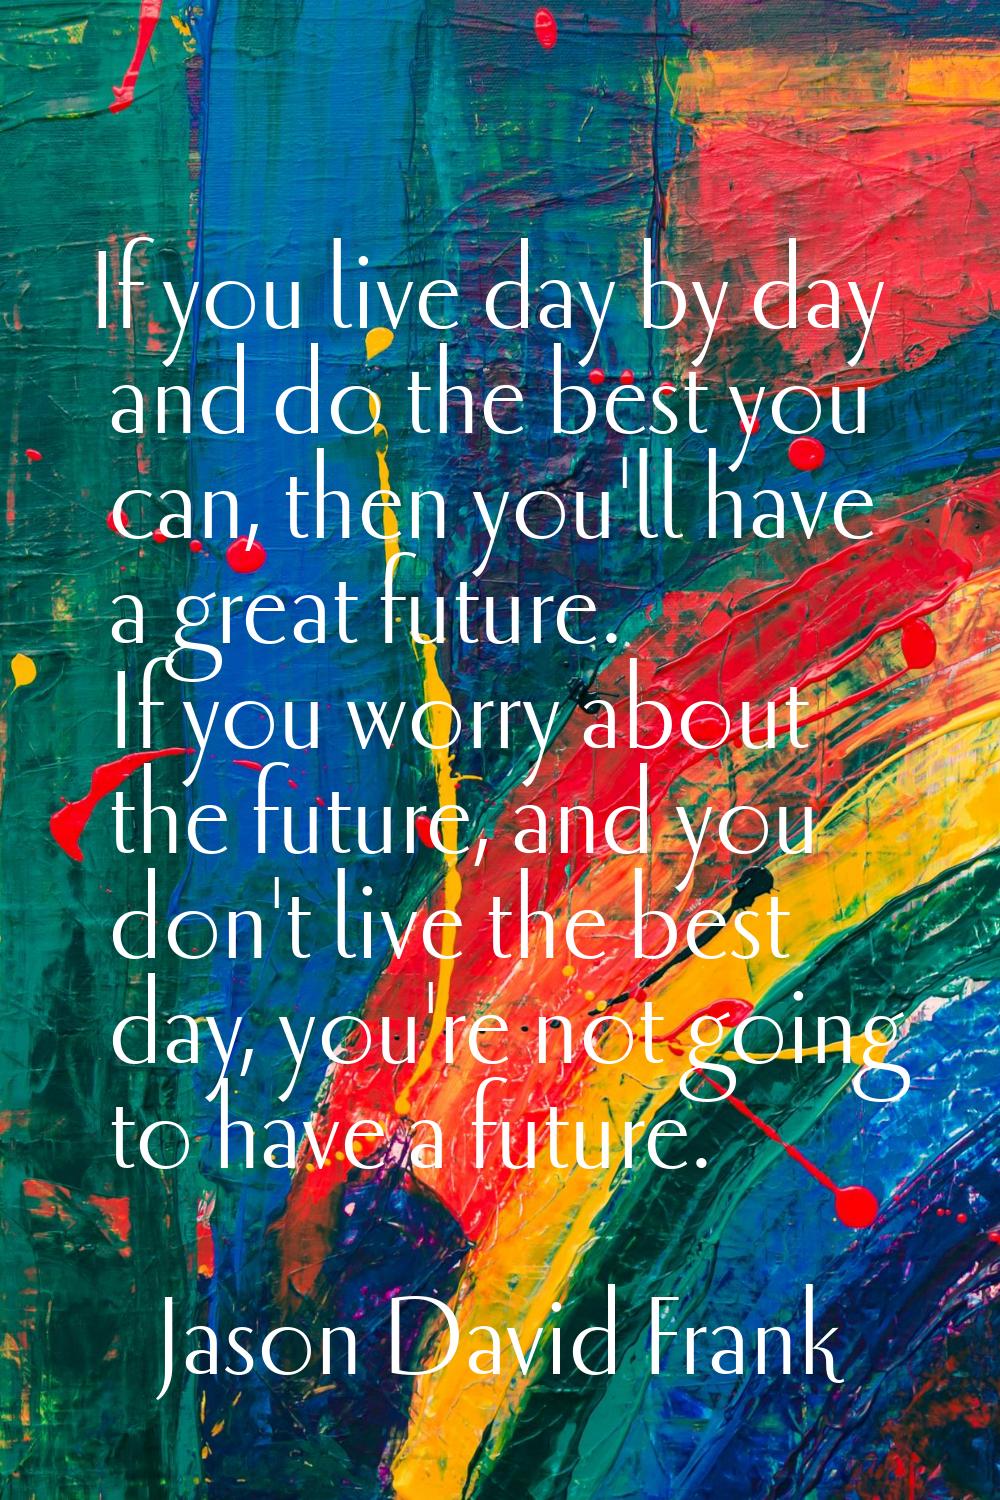 If you live day by day and do the best you can, then you'll have a great future. If you worry about